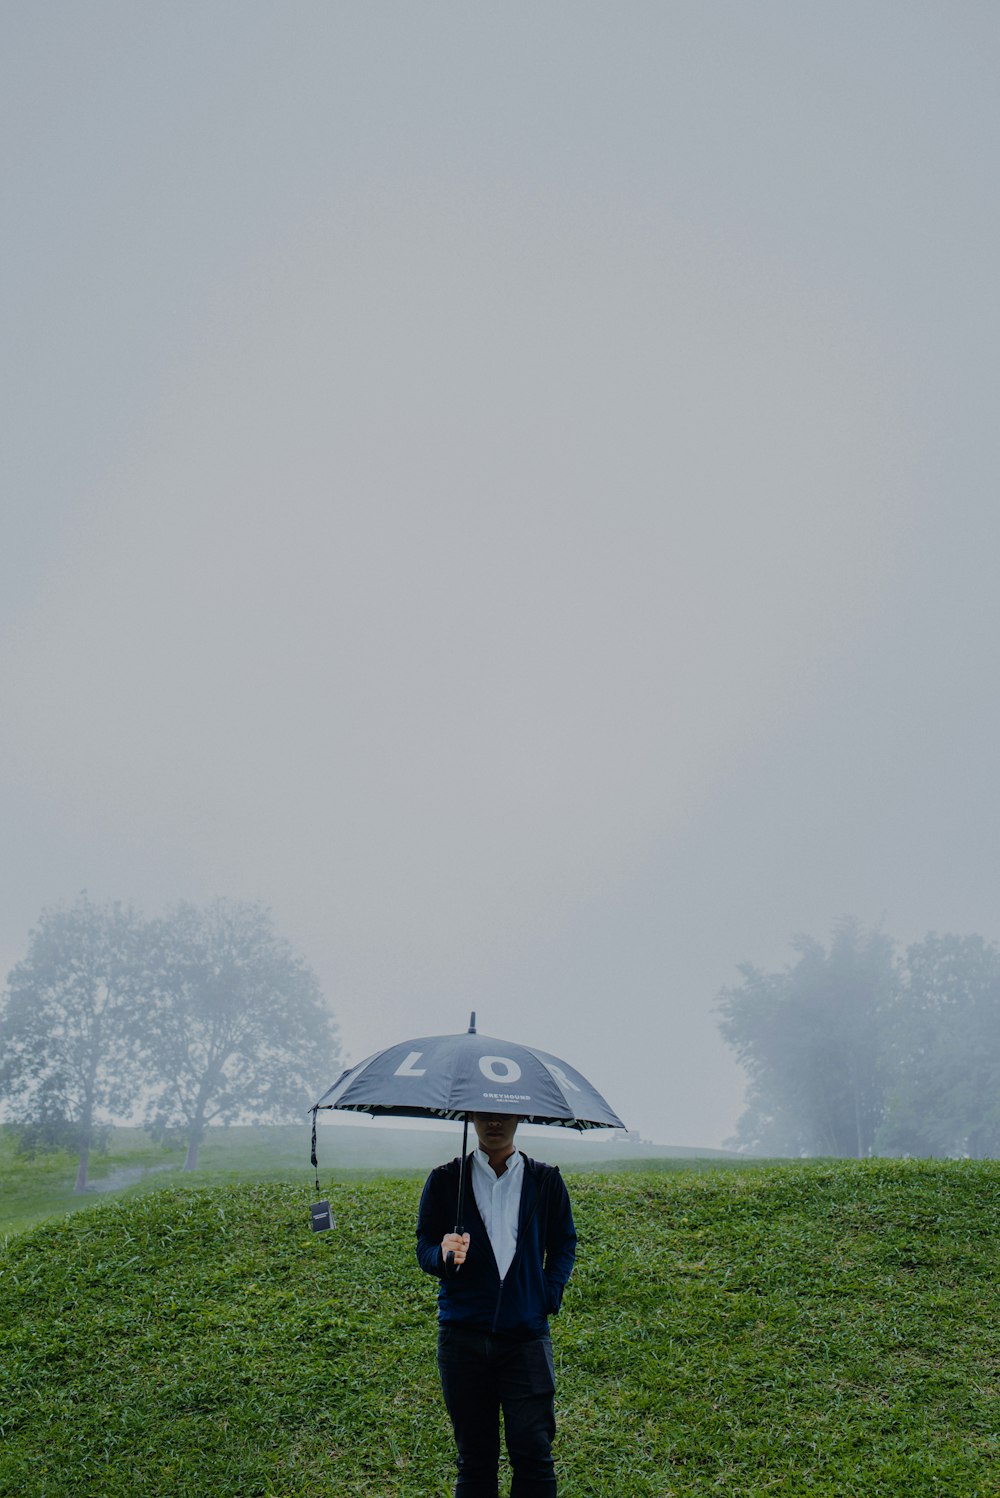 person in black jacket holding umbrella walking on green grass field during foggy weather